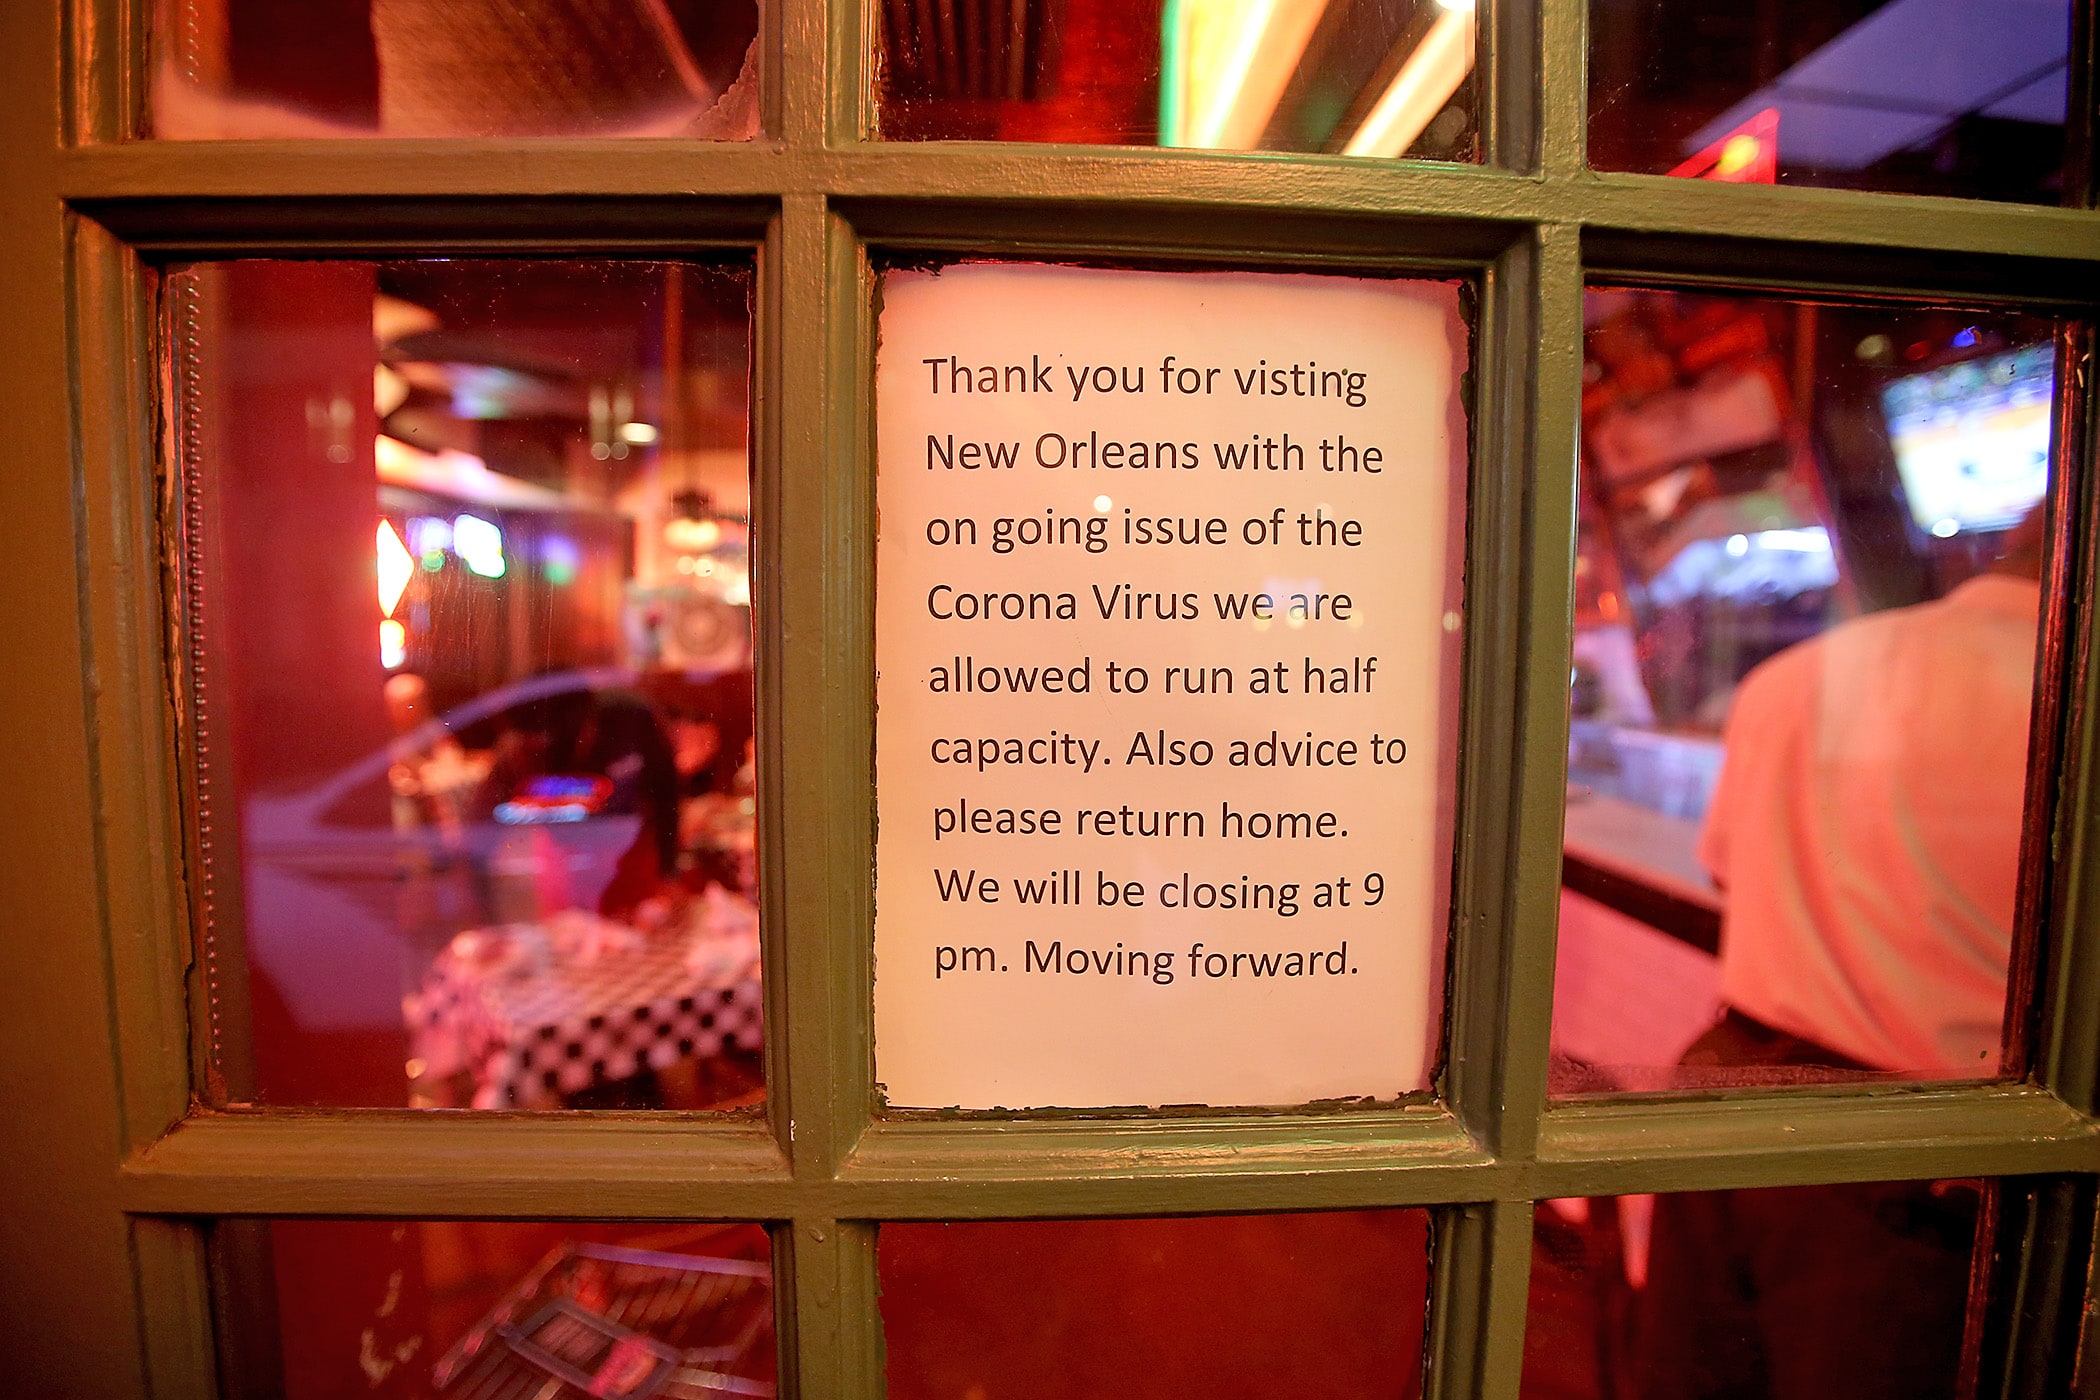 Just after 9 p.m., a restaurant in the French Quarter shuts its doors to comply with the city’s order on Sunday evening, March 15, 2020.